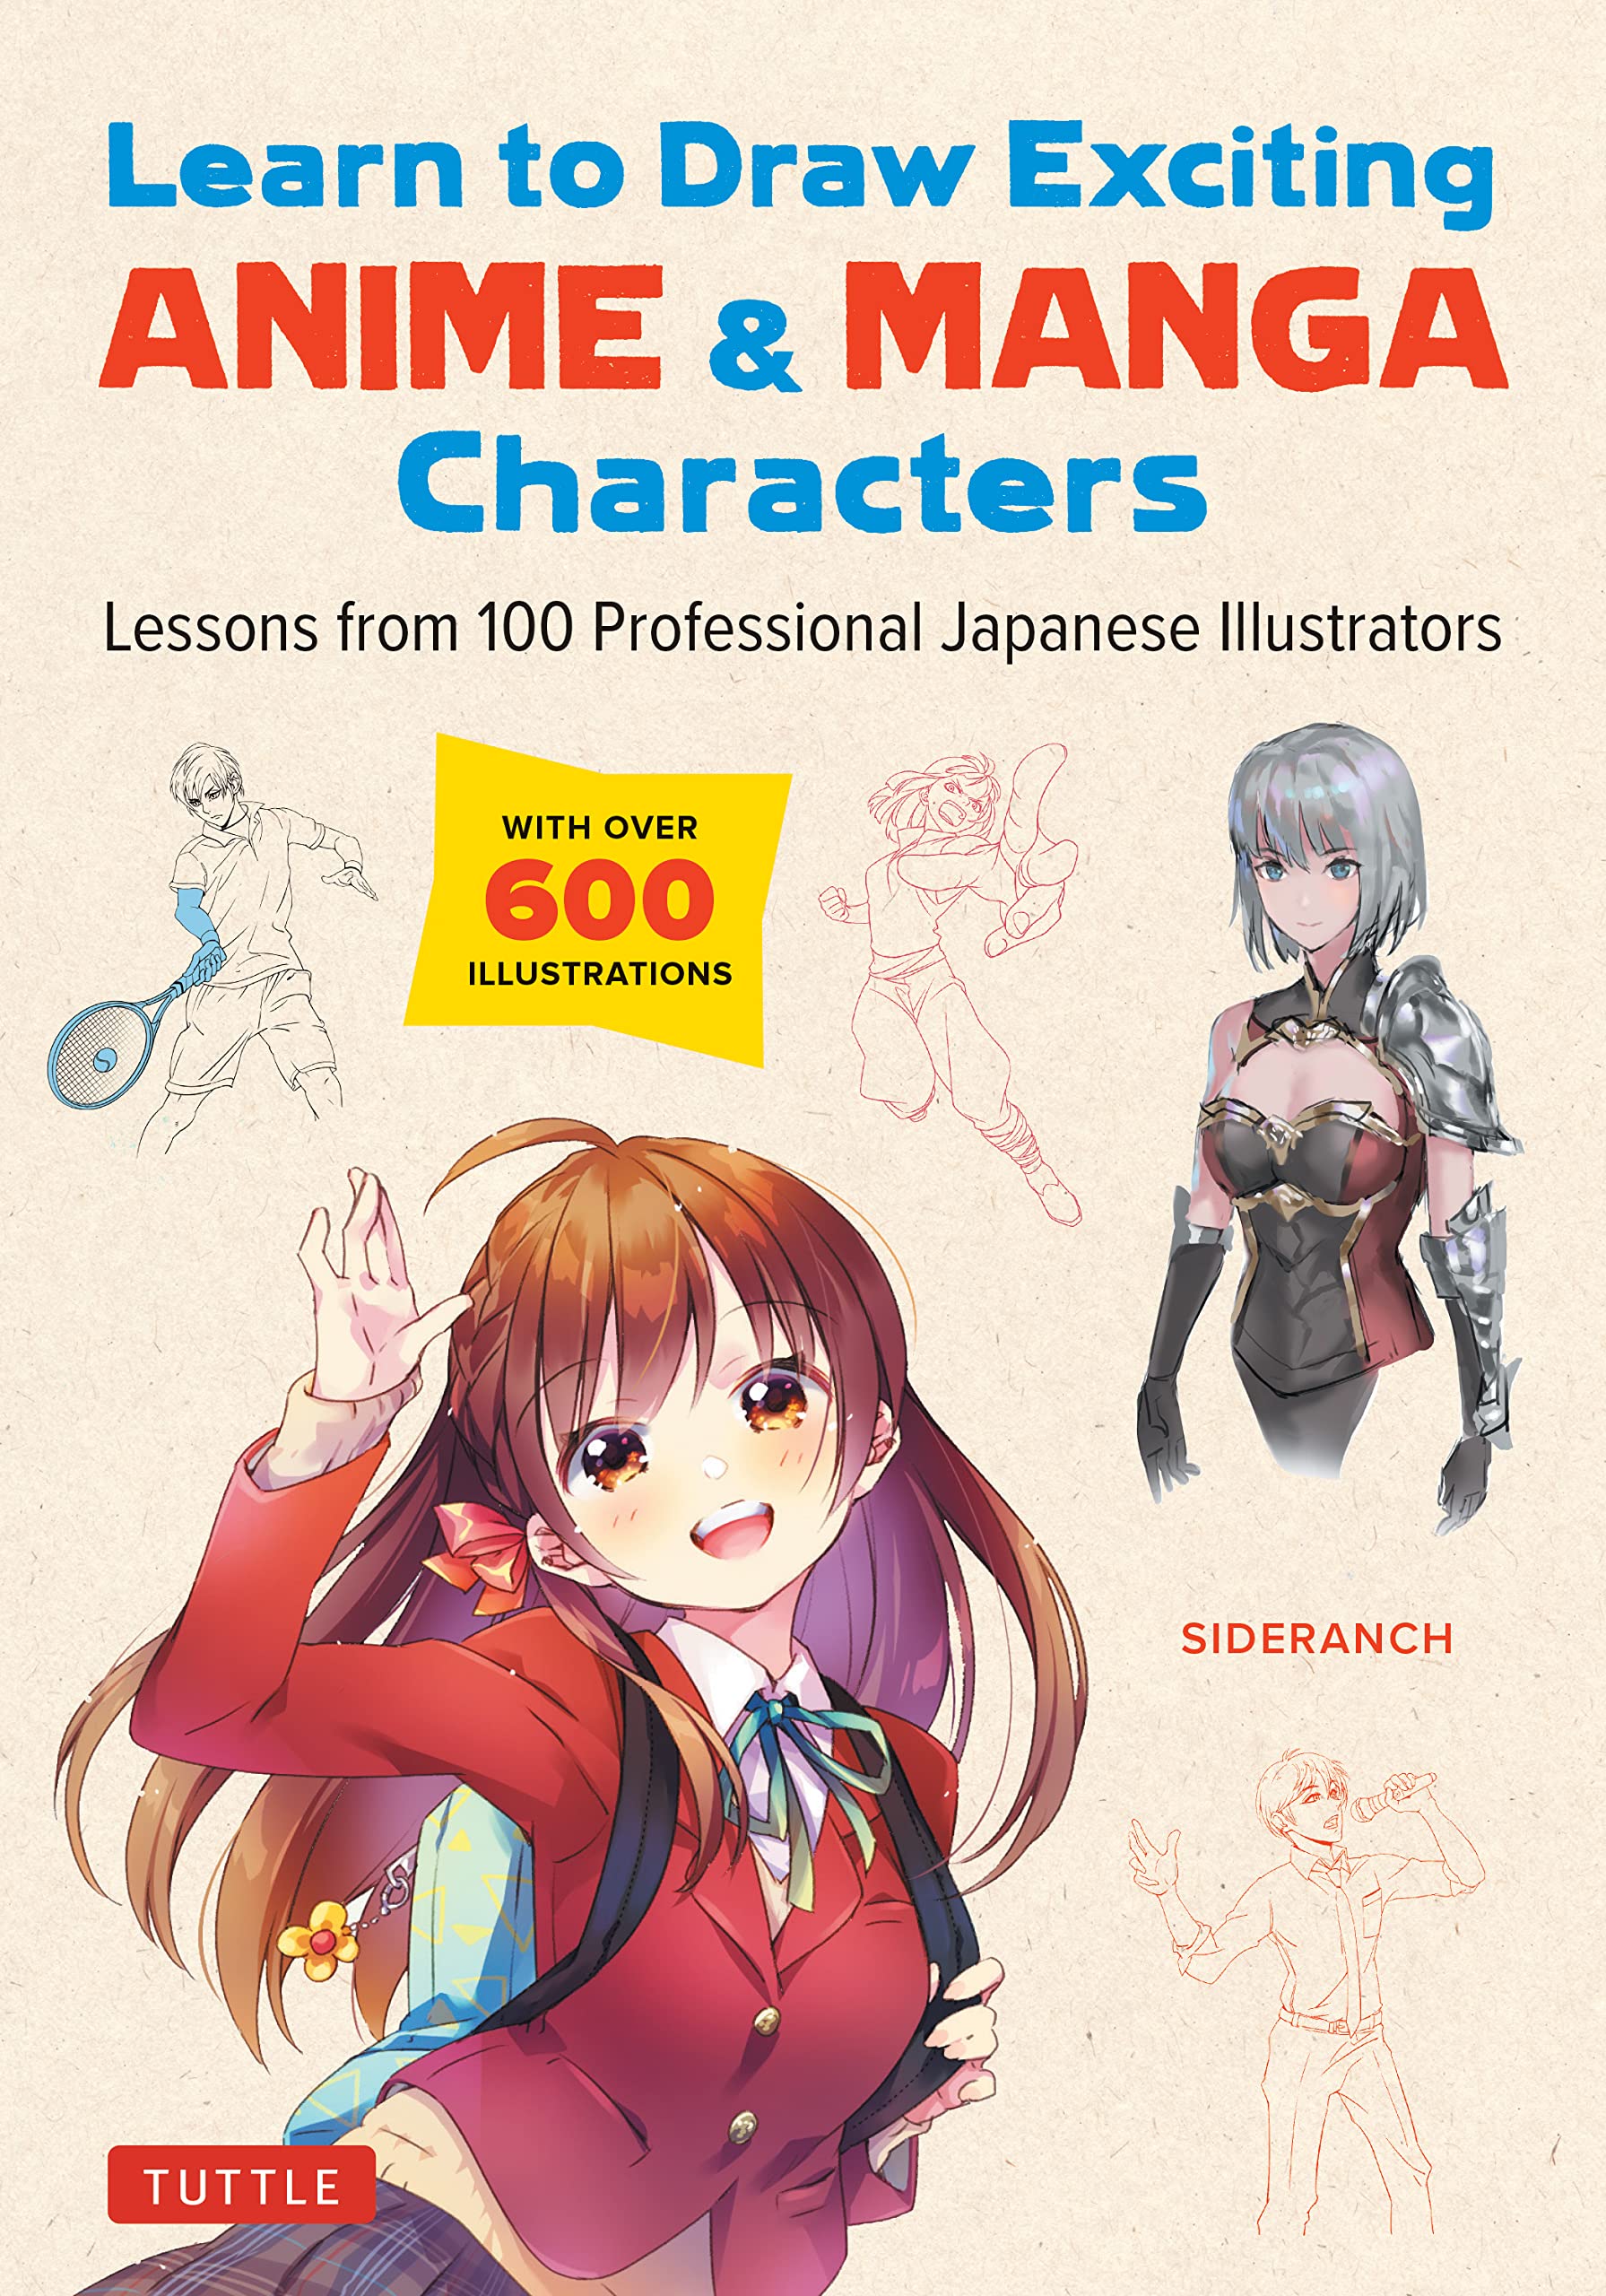 Learn to Draw Exciting Anime & Manga Characters [Book]